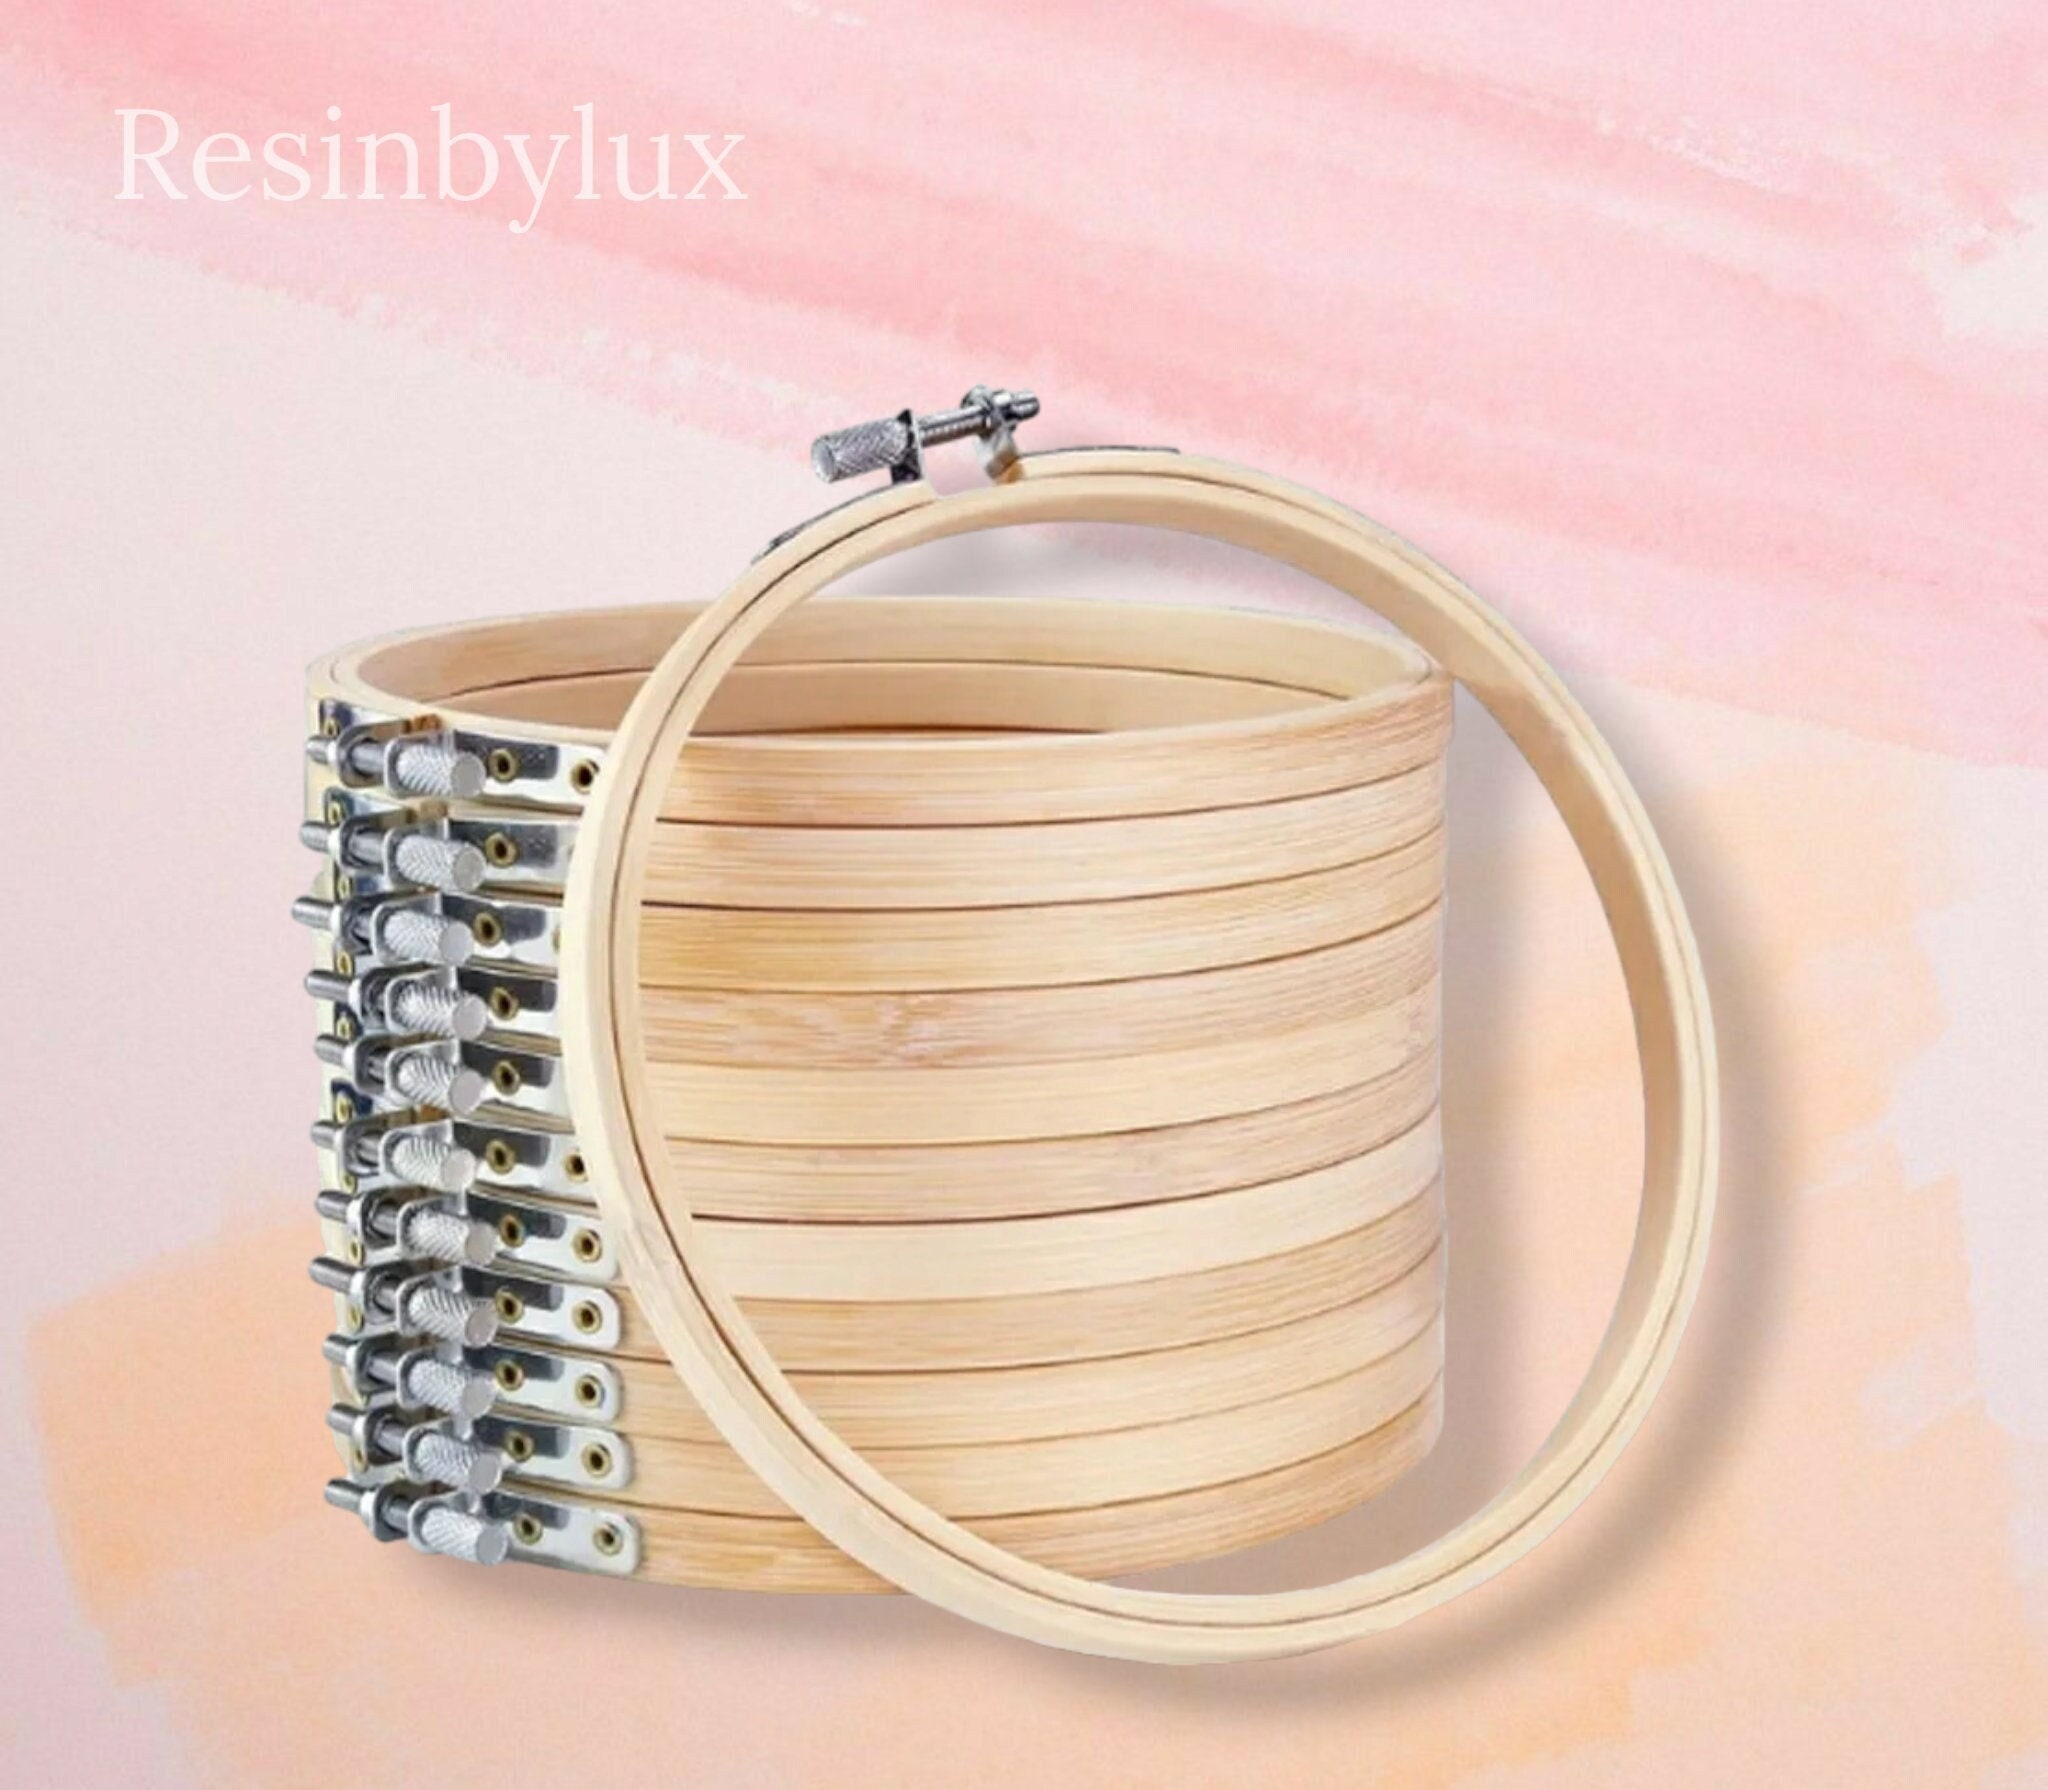 10 Pieces Embroidery Hoop Bamboo 4/5/6 Inch Embroidery Frame for Embroidery  Kit Durable Hoop Without Burr Hoop Art Accessories 